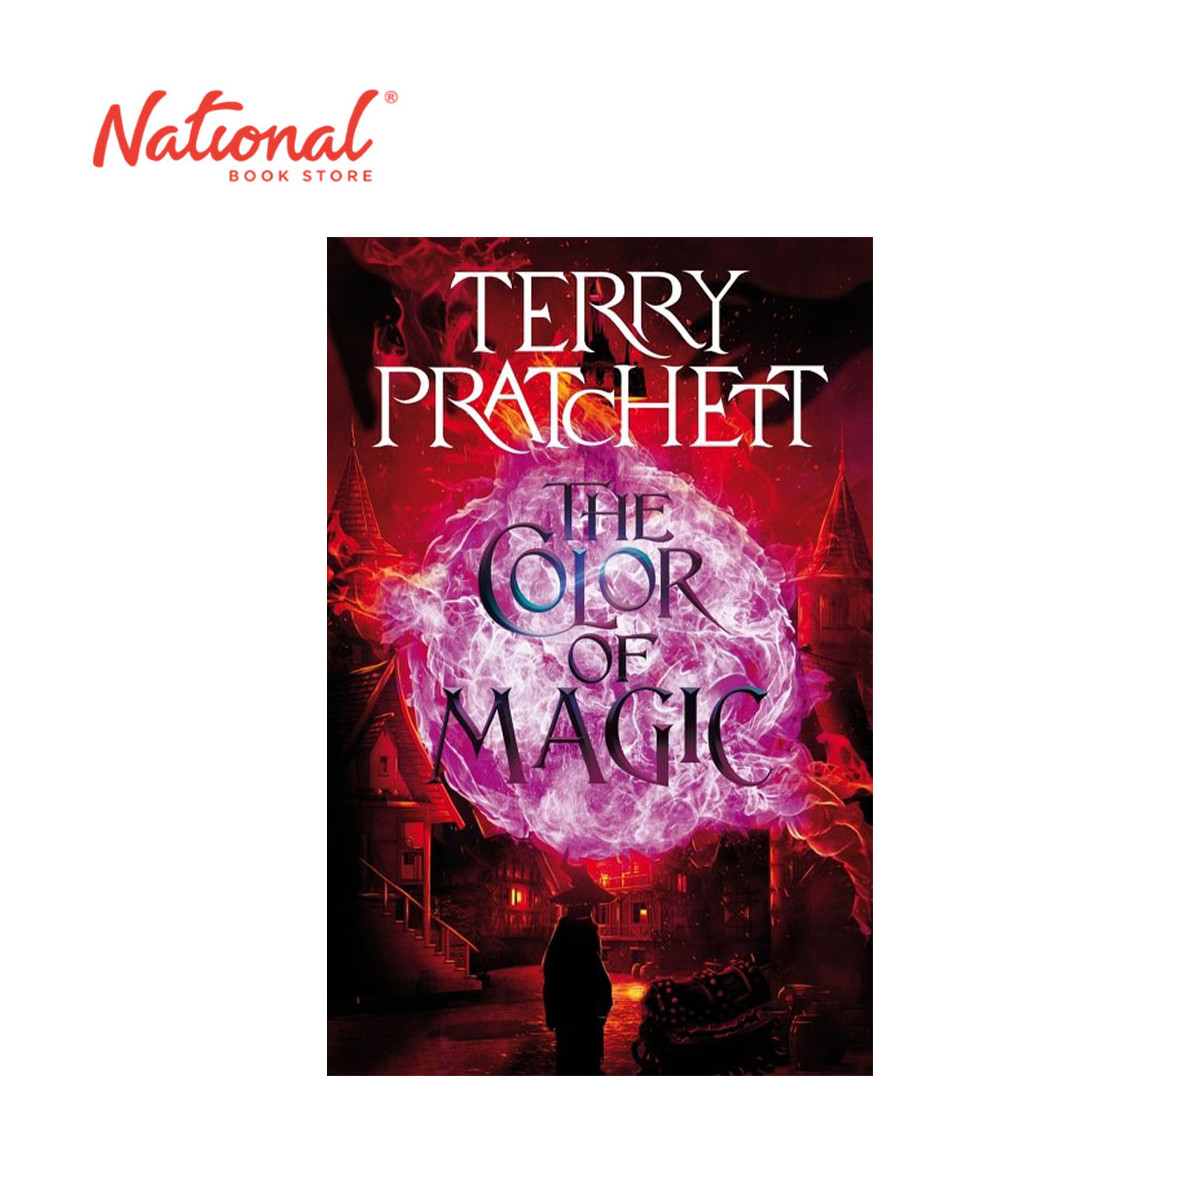 *PRE-ORDER* The Color Of Magic by Terry Pratchett - Trade Paperback - Sci-Fi, Fantasy & Horror